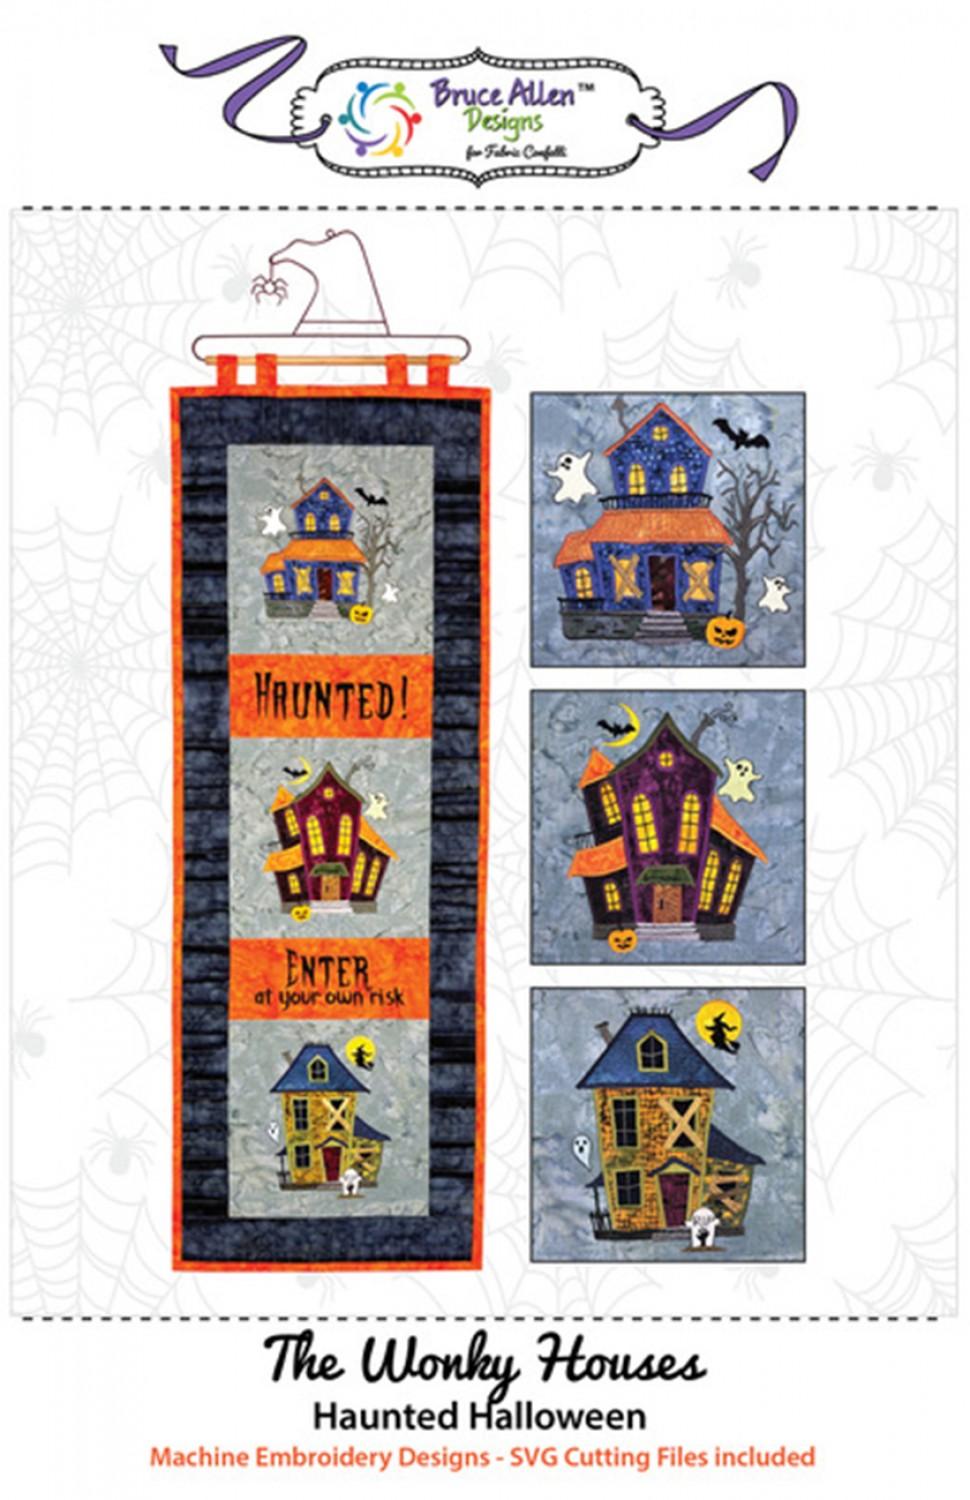 The Wonky Houses Halloweenby Fabric Confetti